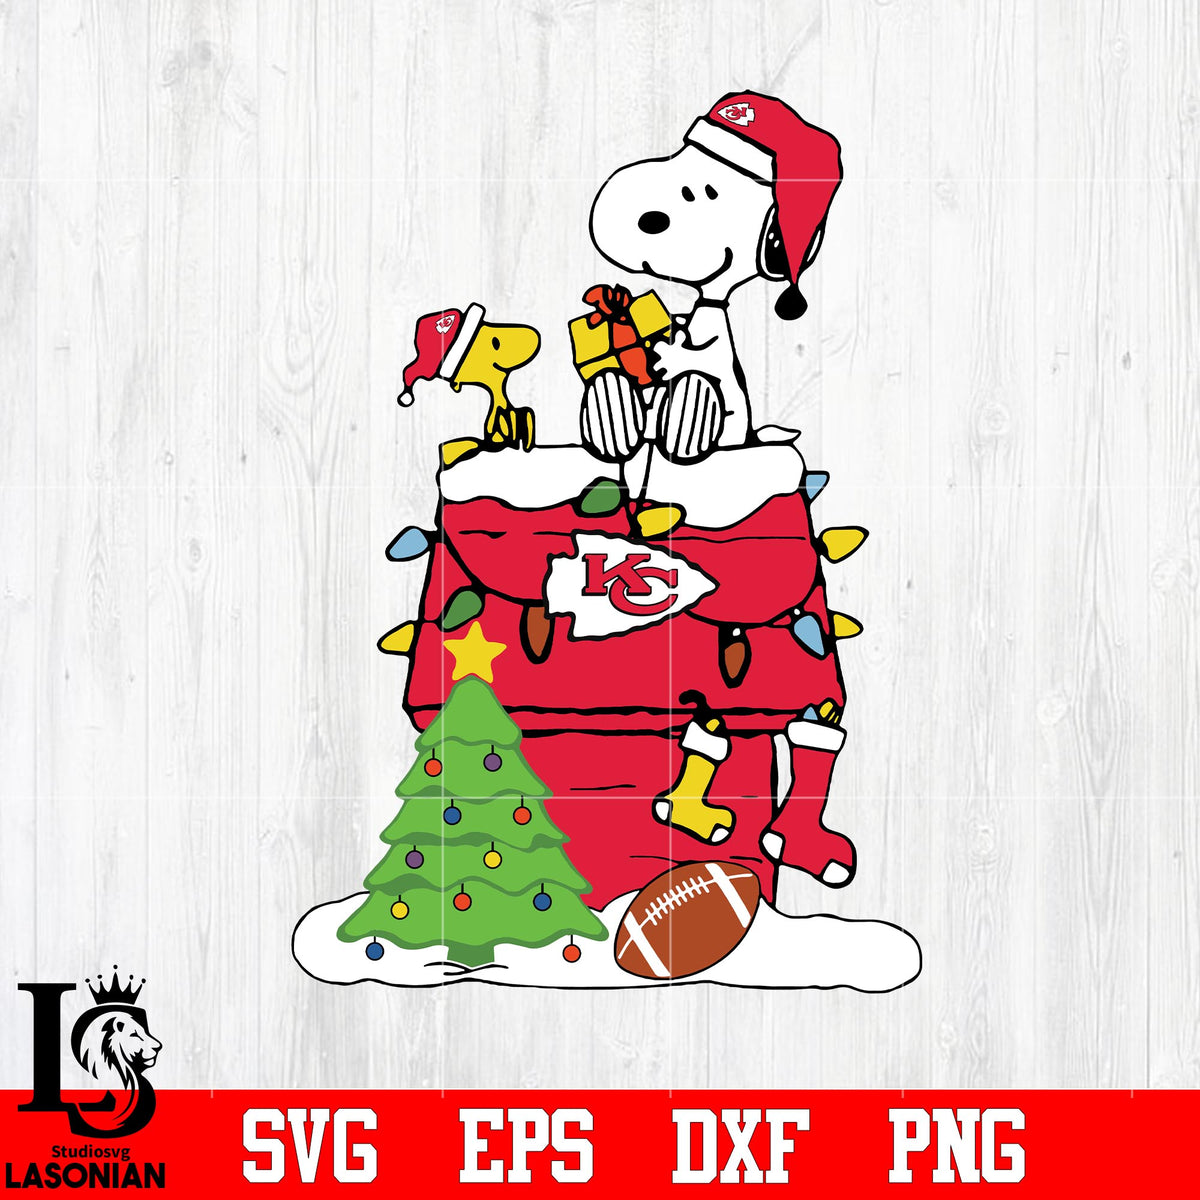 Kansas City Chiefs Snoopy heart svg eps dxf png file – lasoniansvg